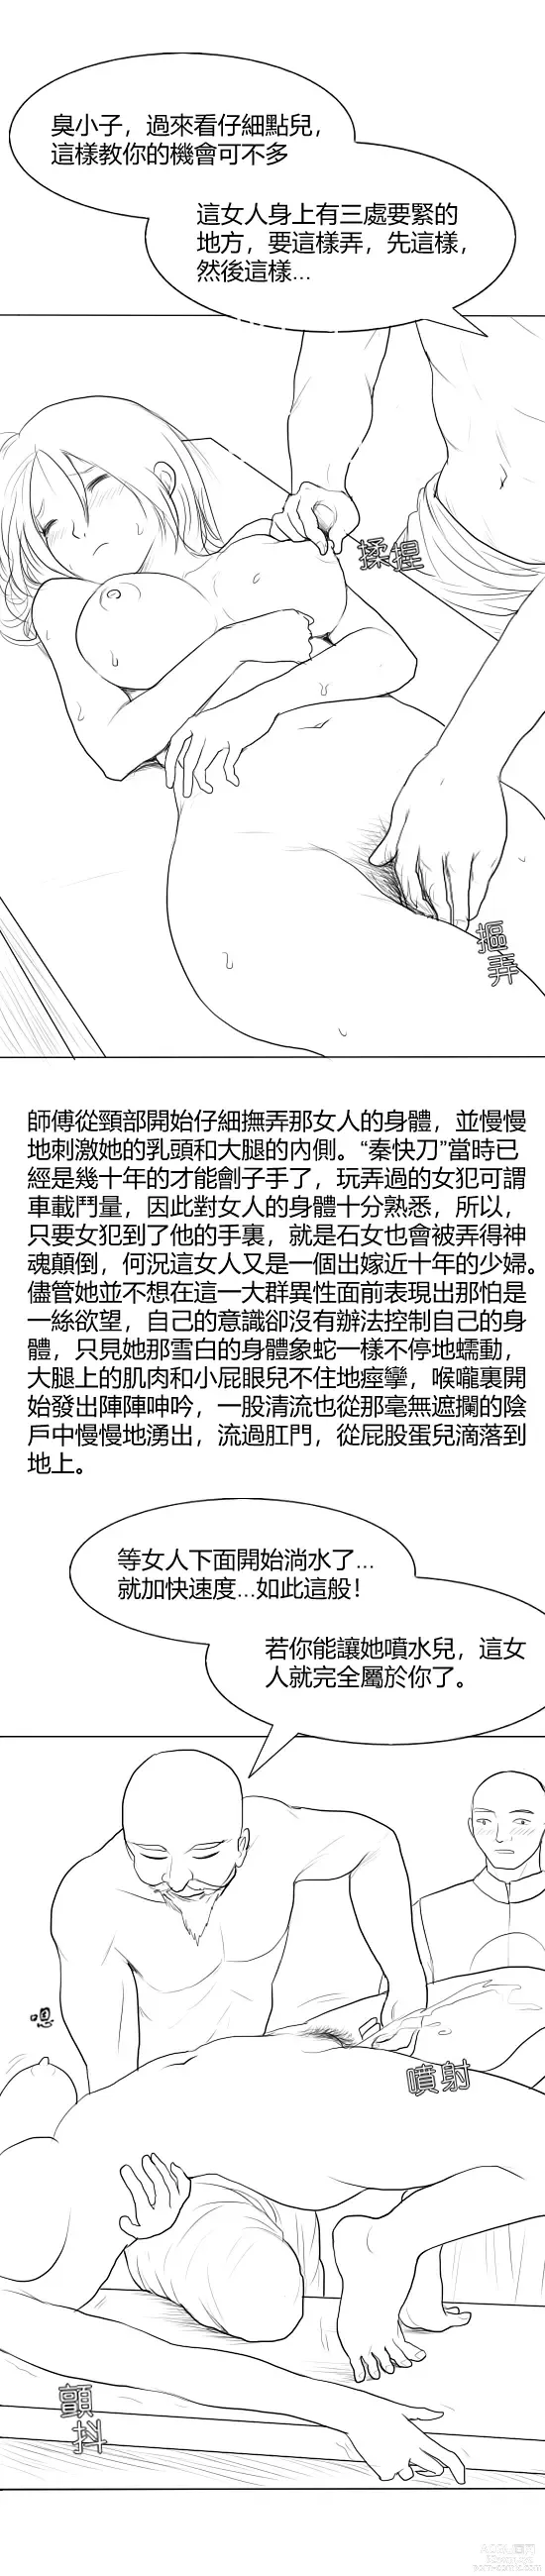 Page 3 of doujinshi 落英  第一话